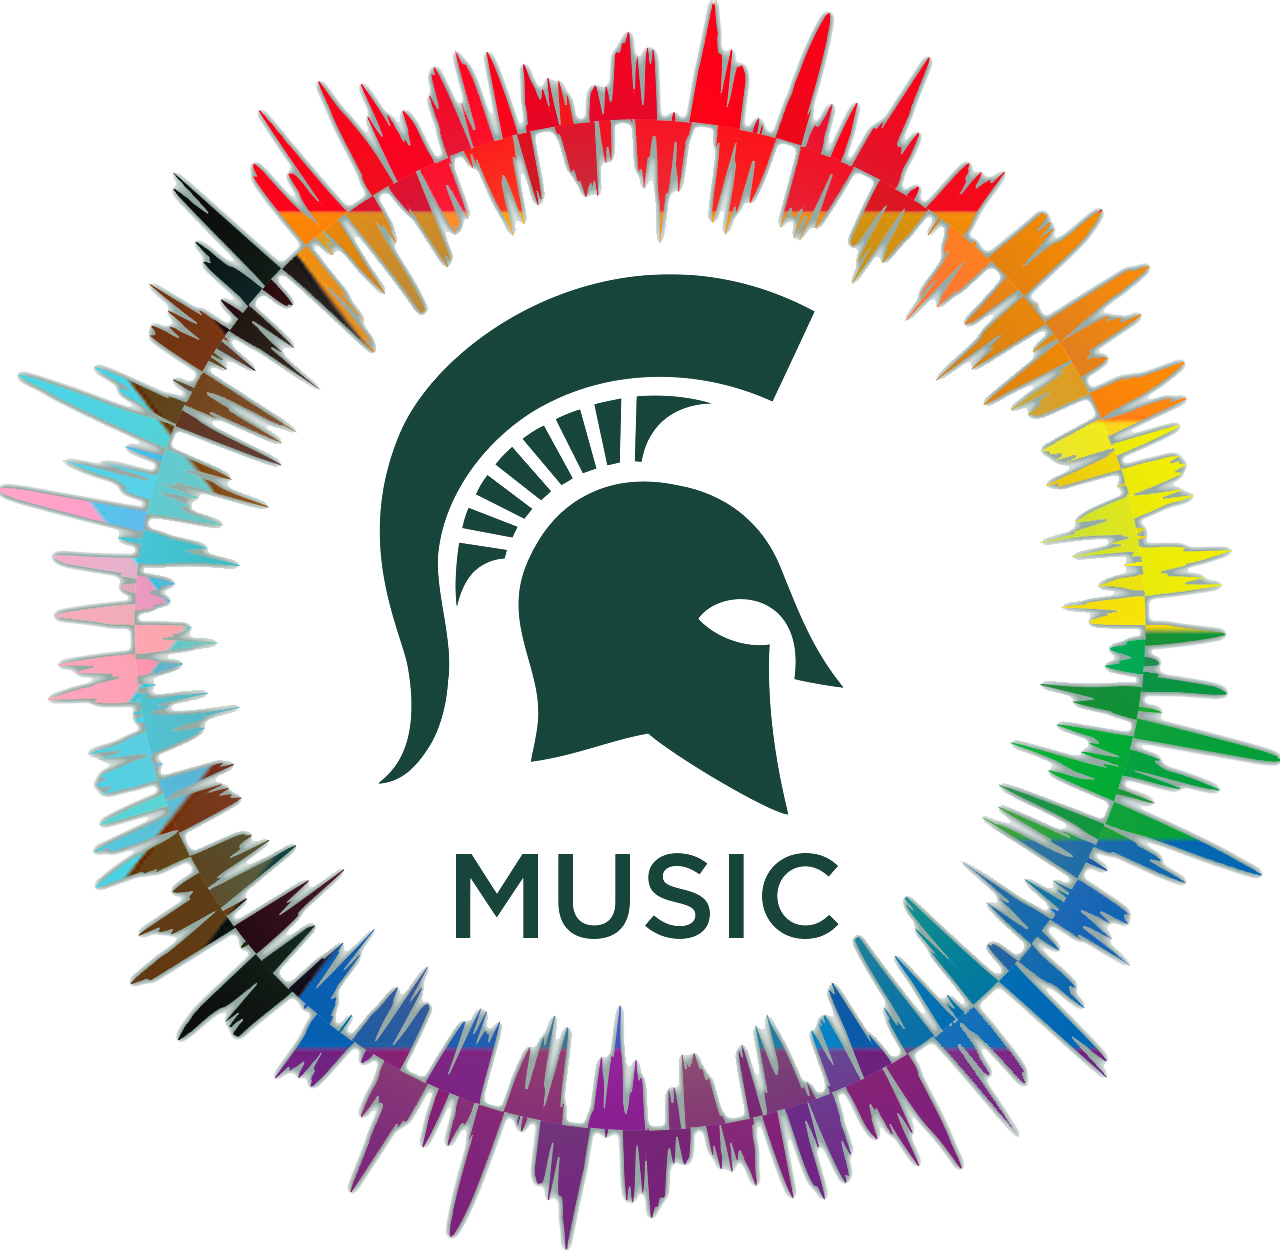 Spartan helmet in green with word Music below it, encircled by a soundwave in rainbow colors